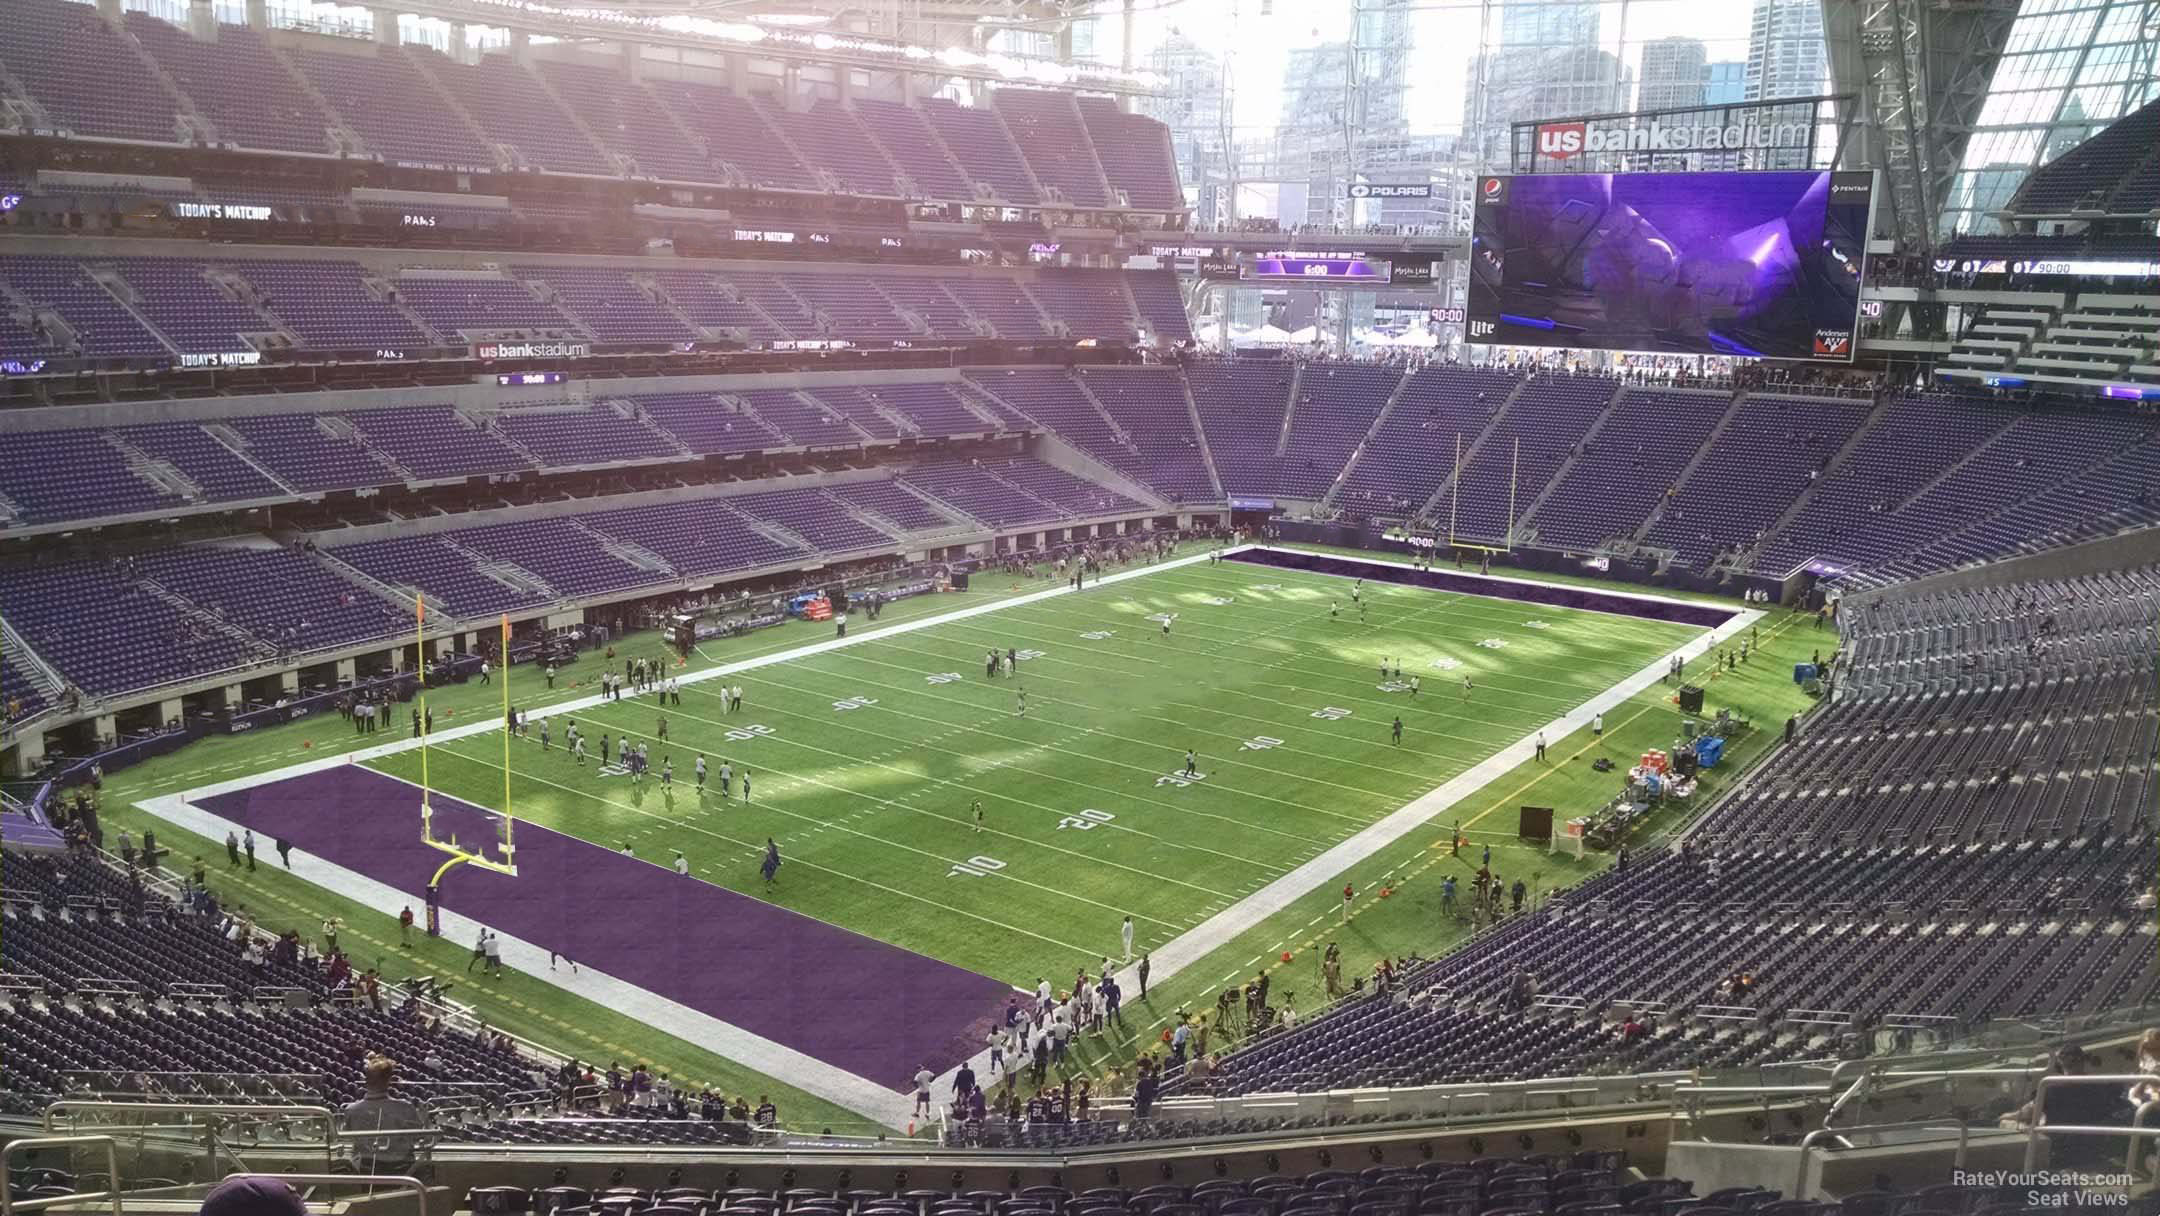 section 219, row 15 seat view  for football - u.s. bank stadium